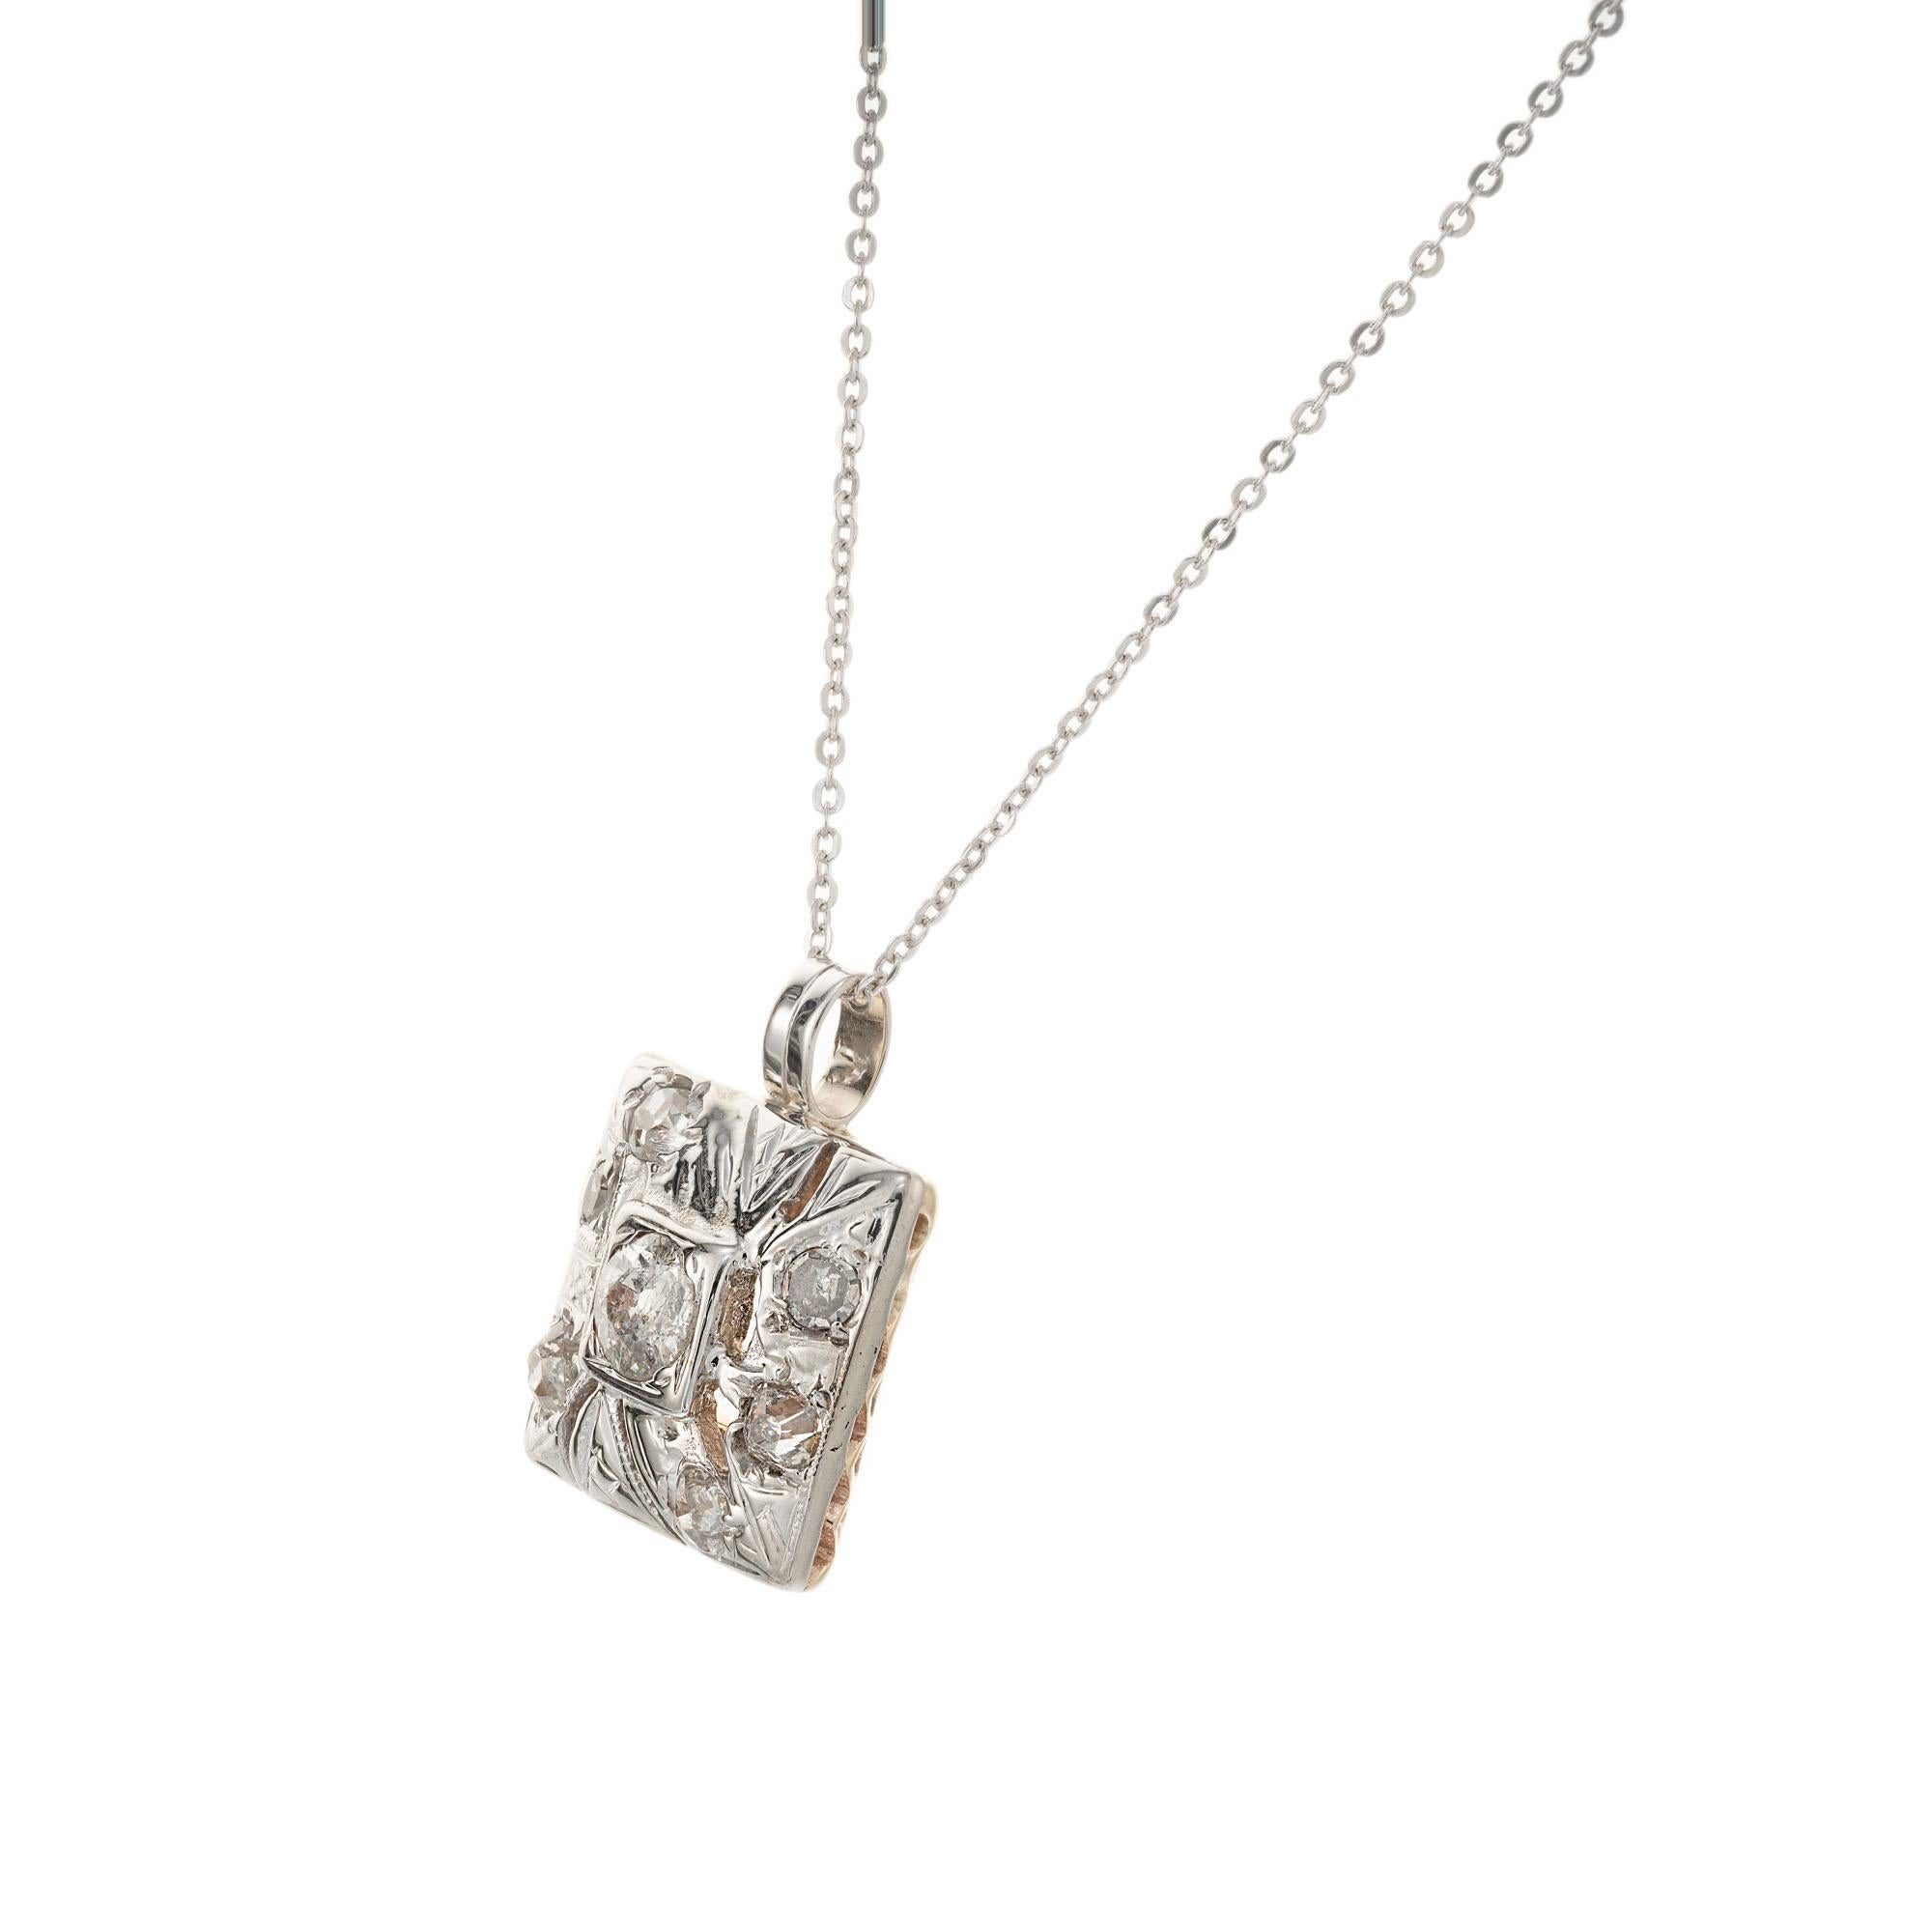 1920’s Art Deco pendant necklace. 1 old mine cut center diamond with 6 old mine cut accent diamonds in 14k white gold with yellow gold back setting. 16 inch chain.  

1 old mine cut diamond, J SI approx. .32cts
6 old mine cut diamonds, I-J SI